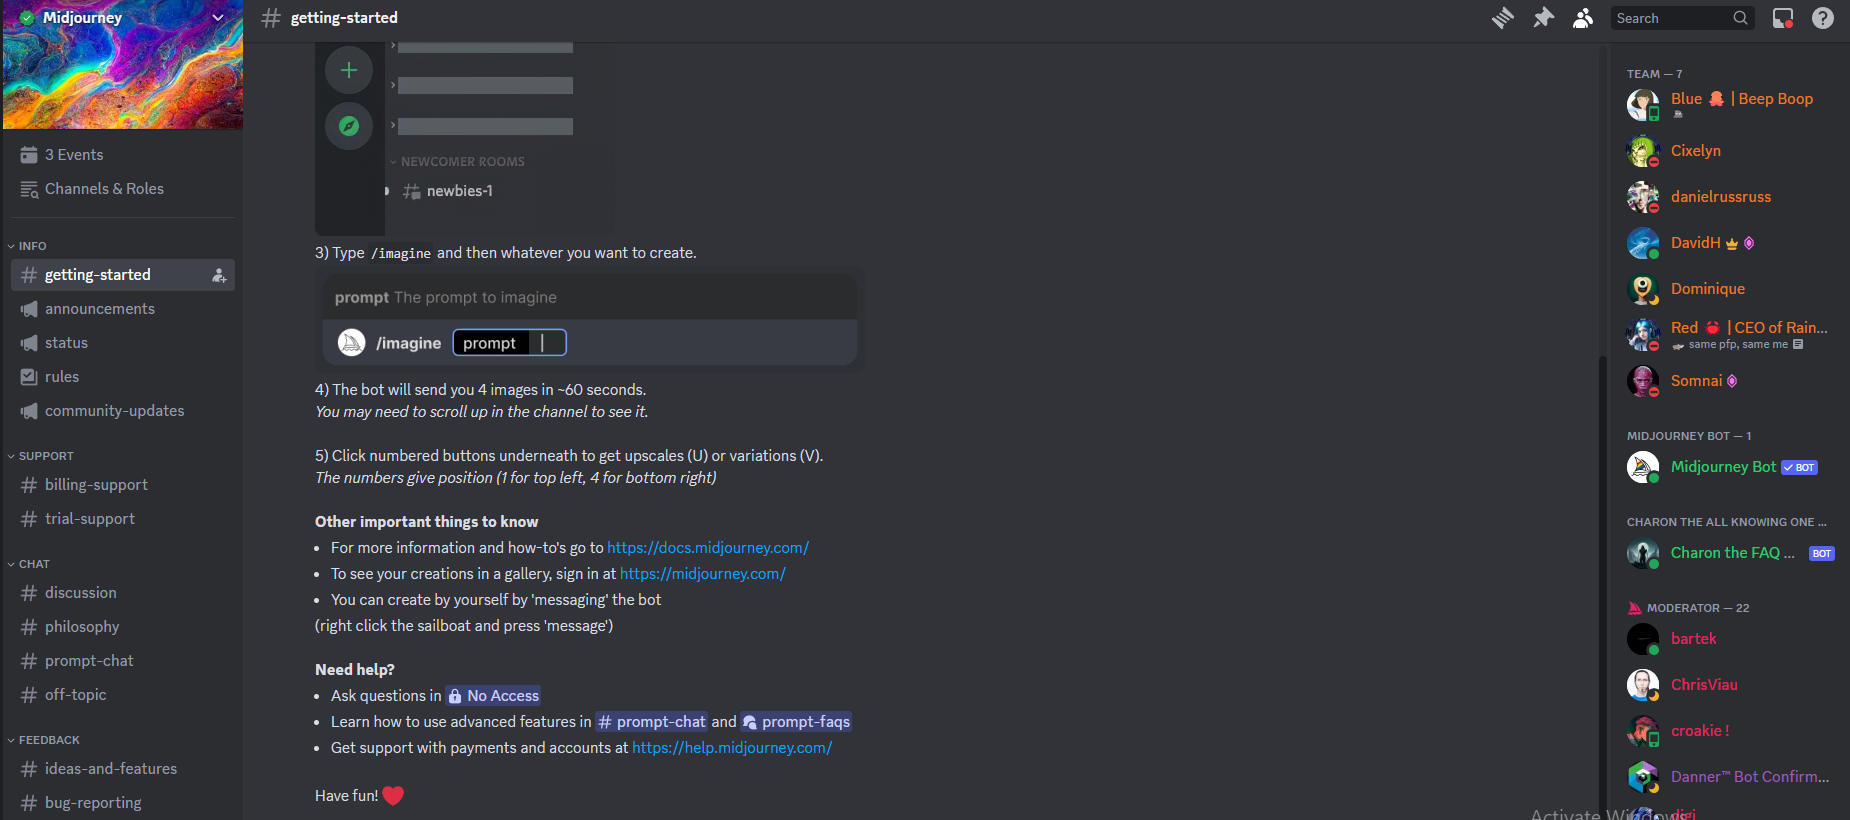 A screenshot of the 'Mid Journey' Discord server showcasing various dedicated channels for discussions, announcements, and more, creating the perfect space for effective communication within the community.